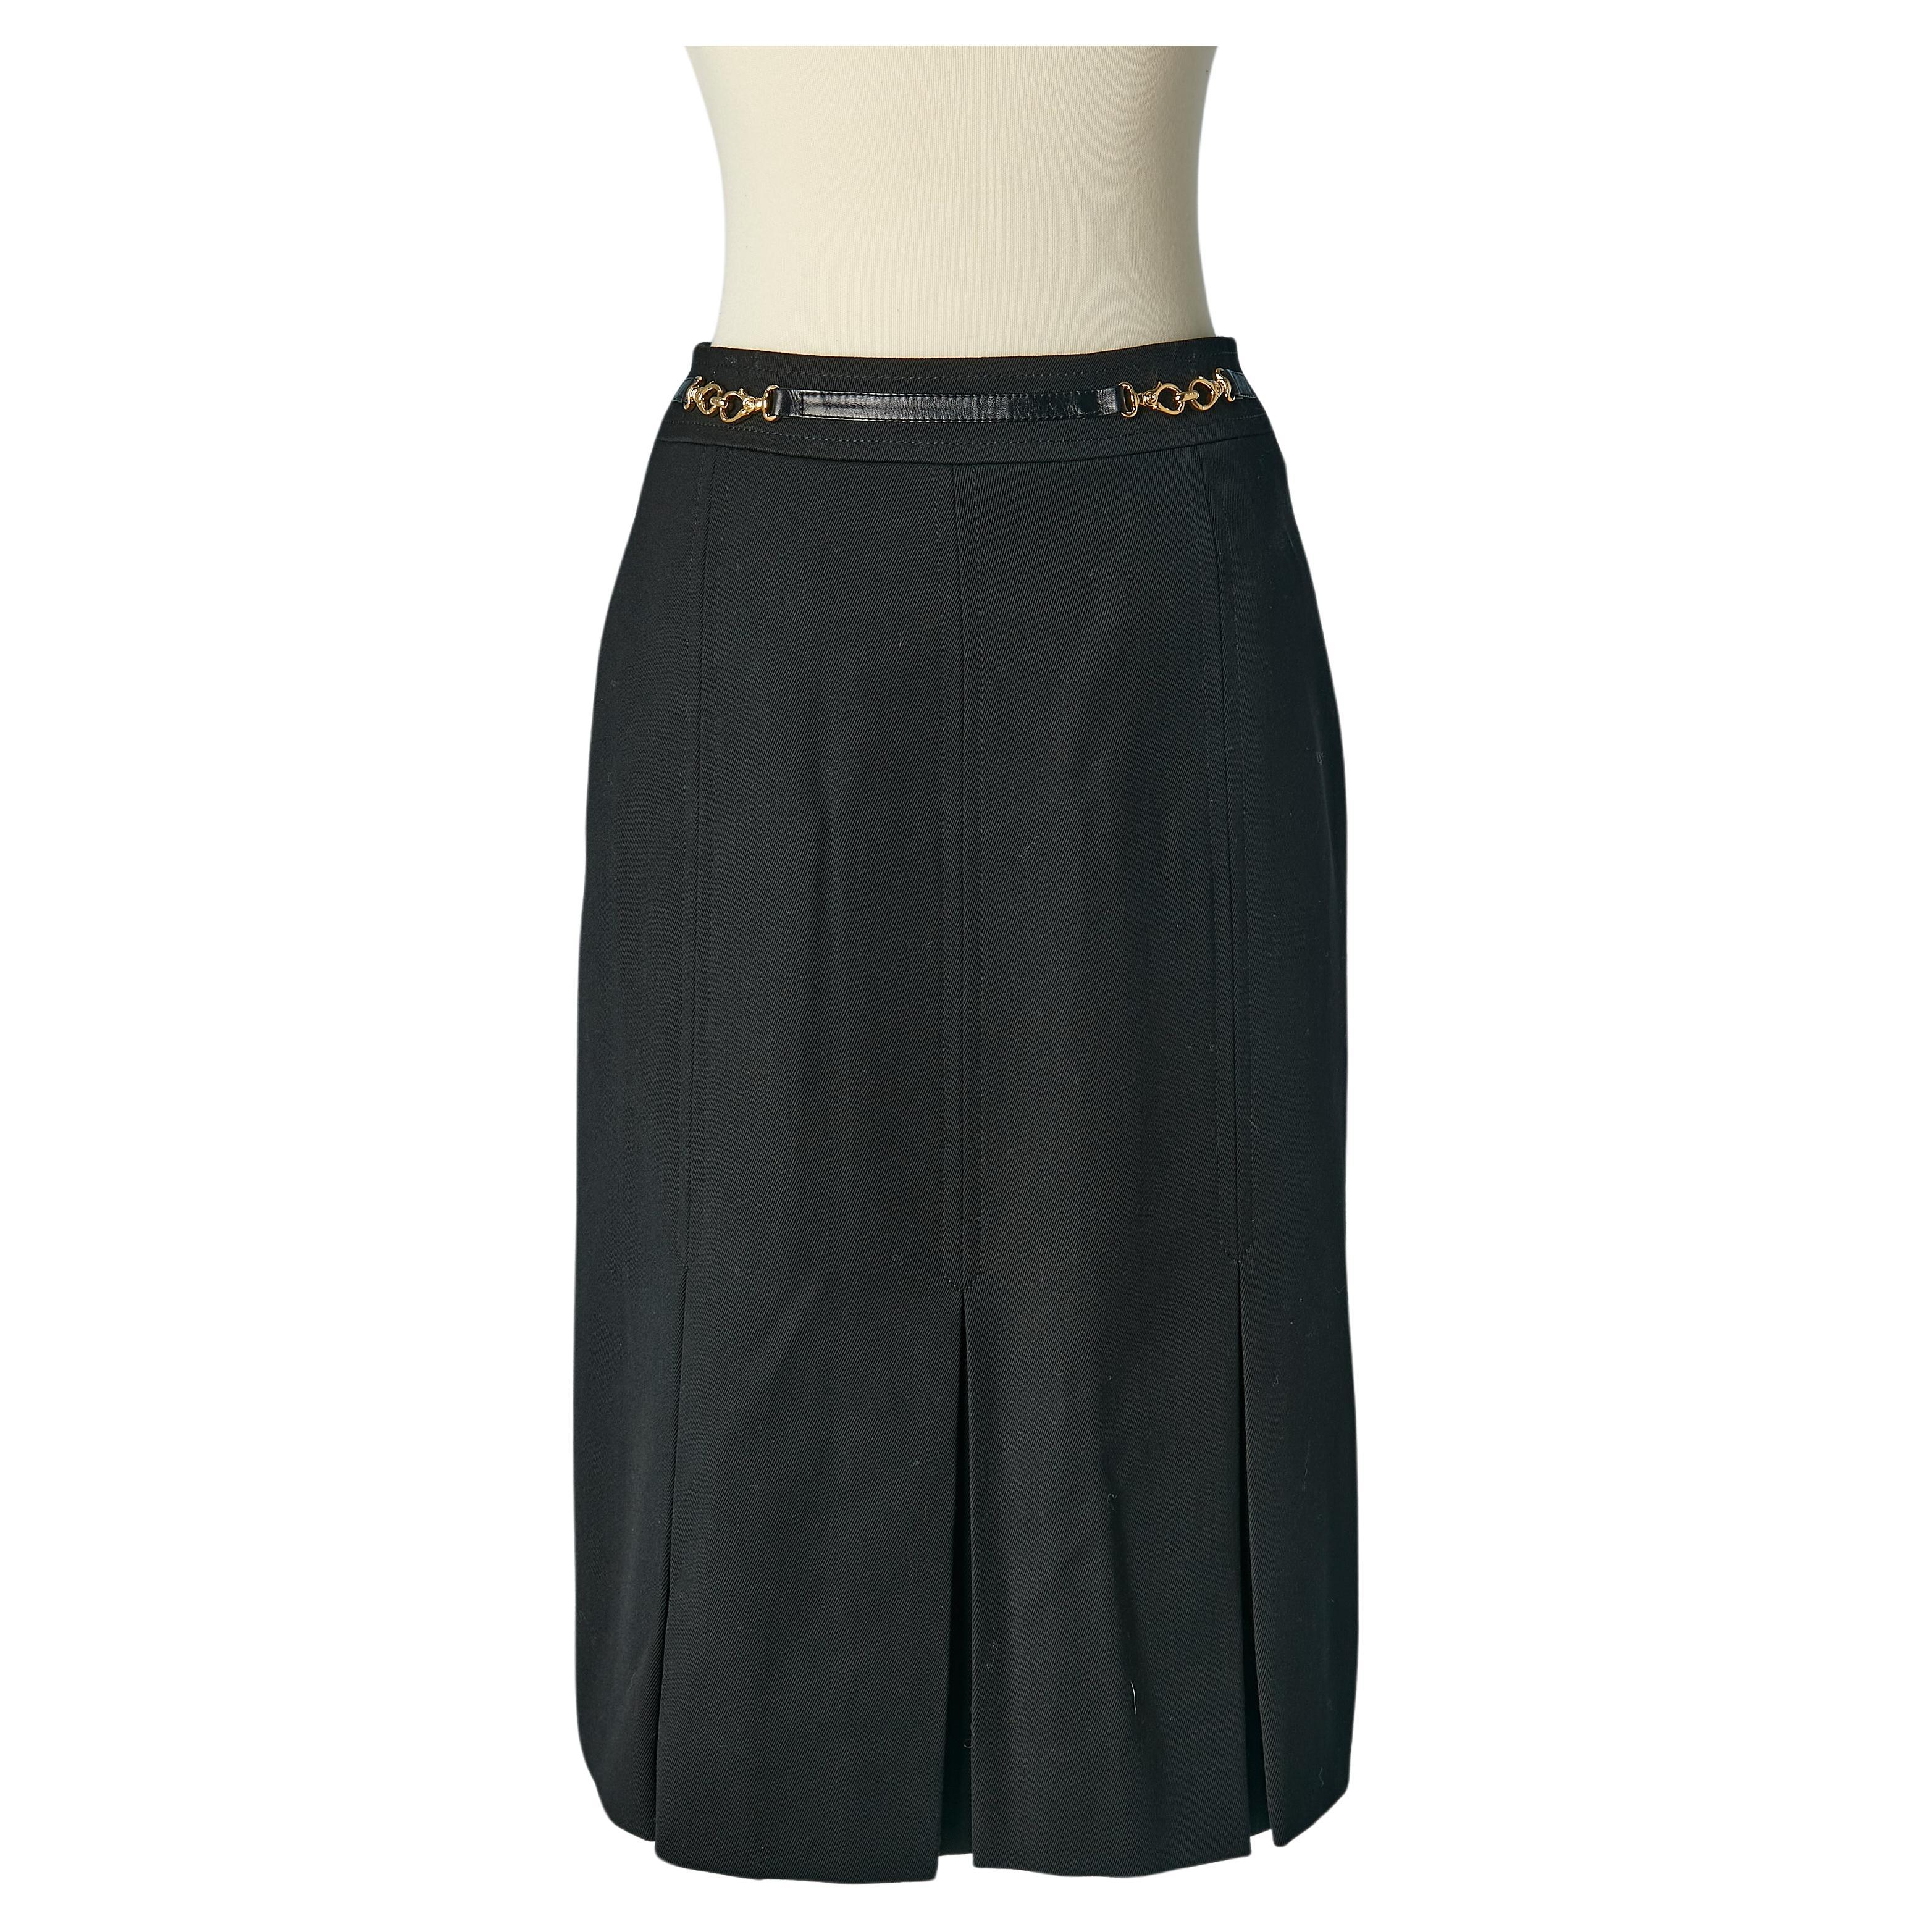 Black wool skirt with box pleats and gold metal buckle on the waist CELINE For Sale